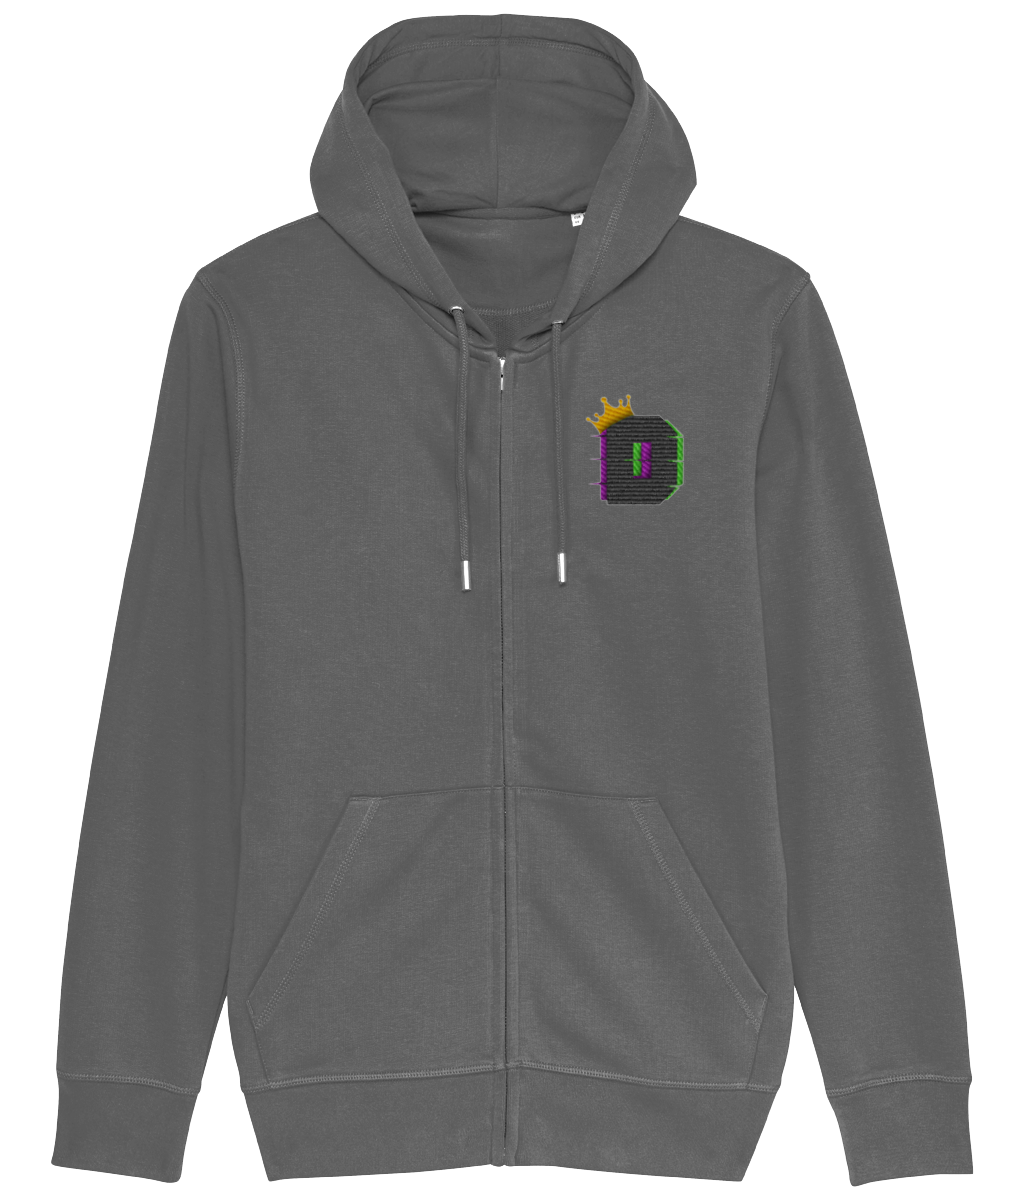 The King D42 Embroidered Zip Connector Hoodie